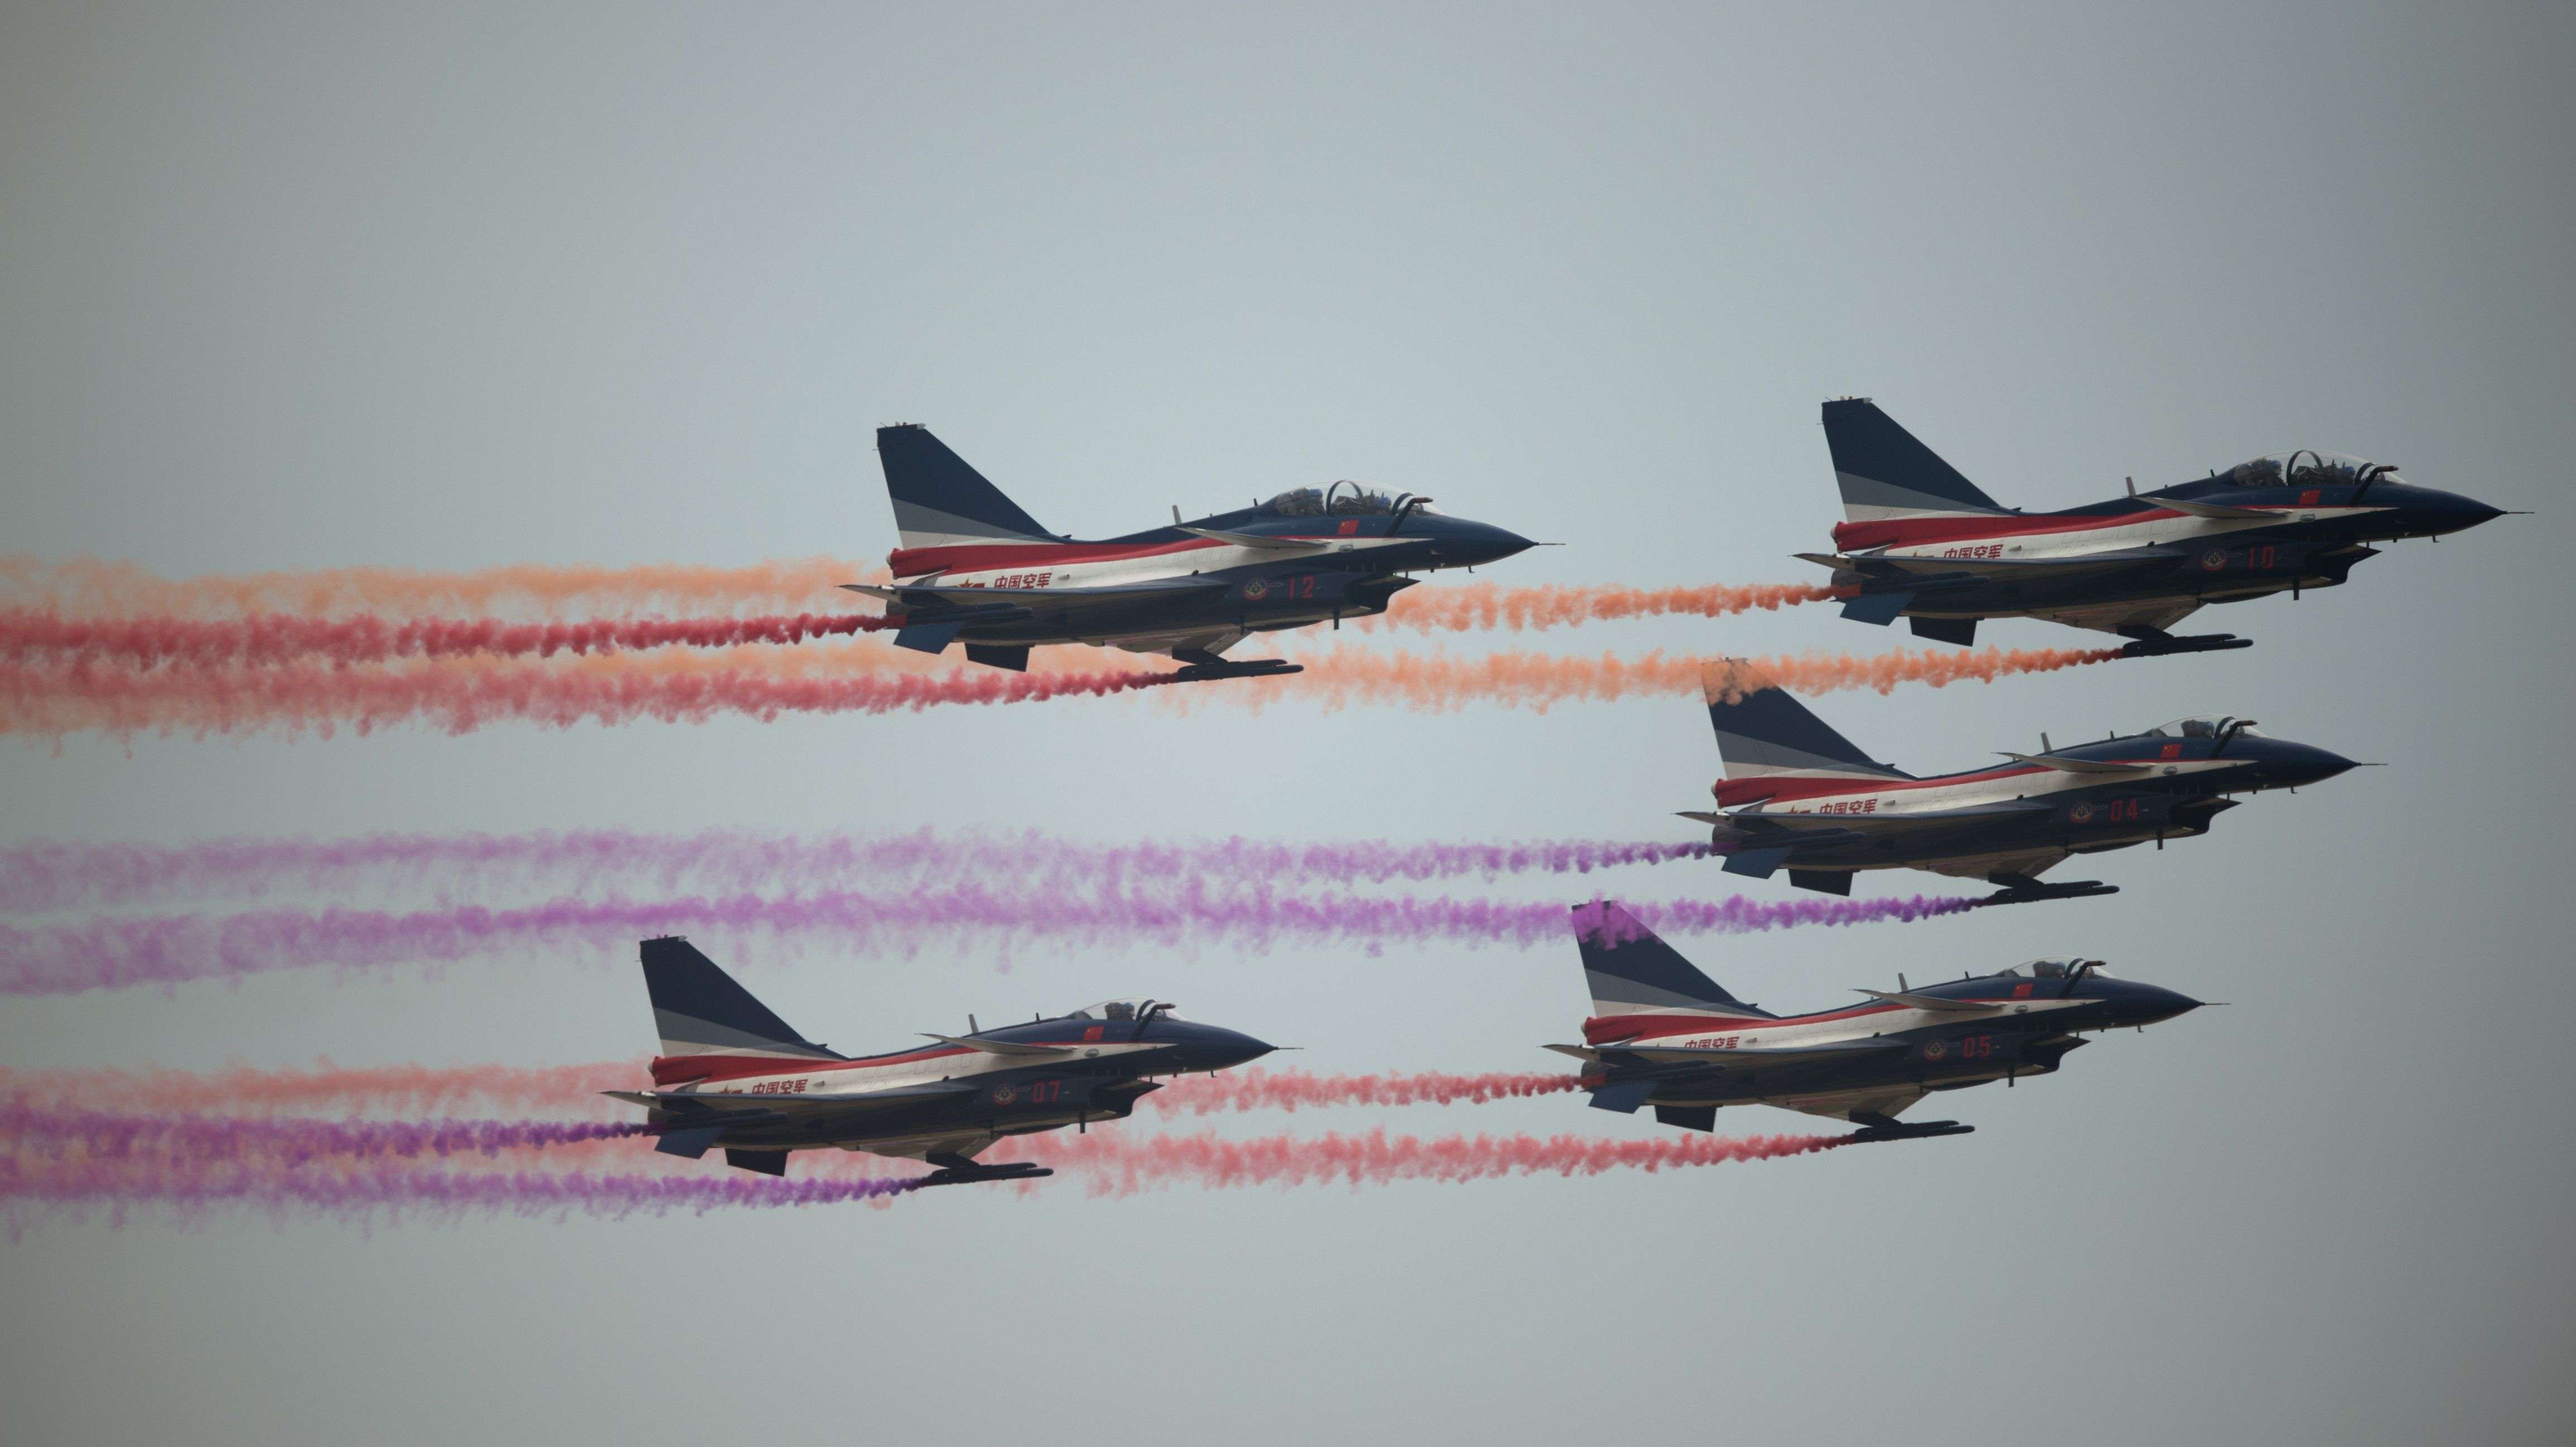 J-10 fighter jets of the Bayi Aerobatic Team of the People’s Liberation Army's Air Force perform at the Airshow China 2014. Photo: Johanne Eisele.